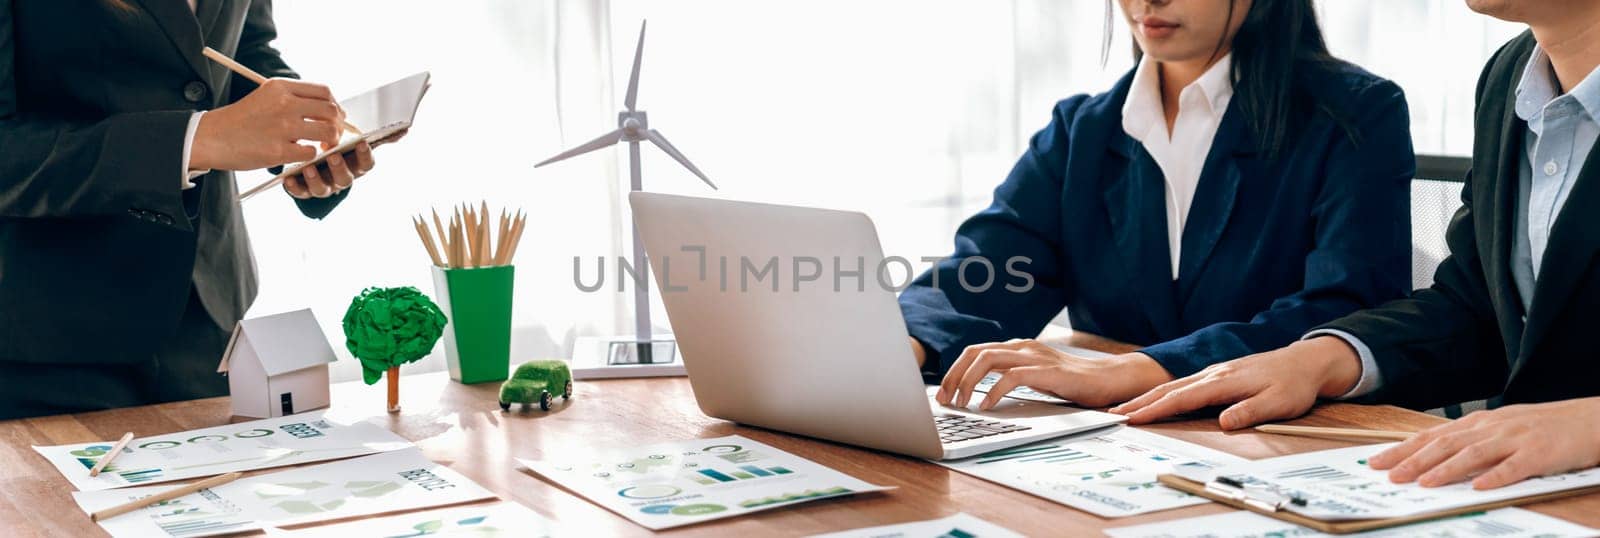 Eco business company meeting with group of business people using laptop to plan strategy and discuss marketing of eco-friendly and clean energy products. Green business company concept. Trailblazing